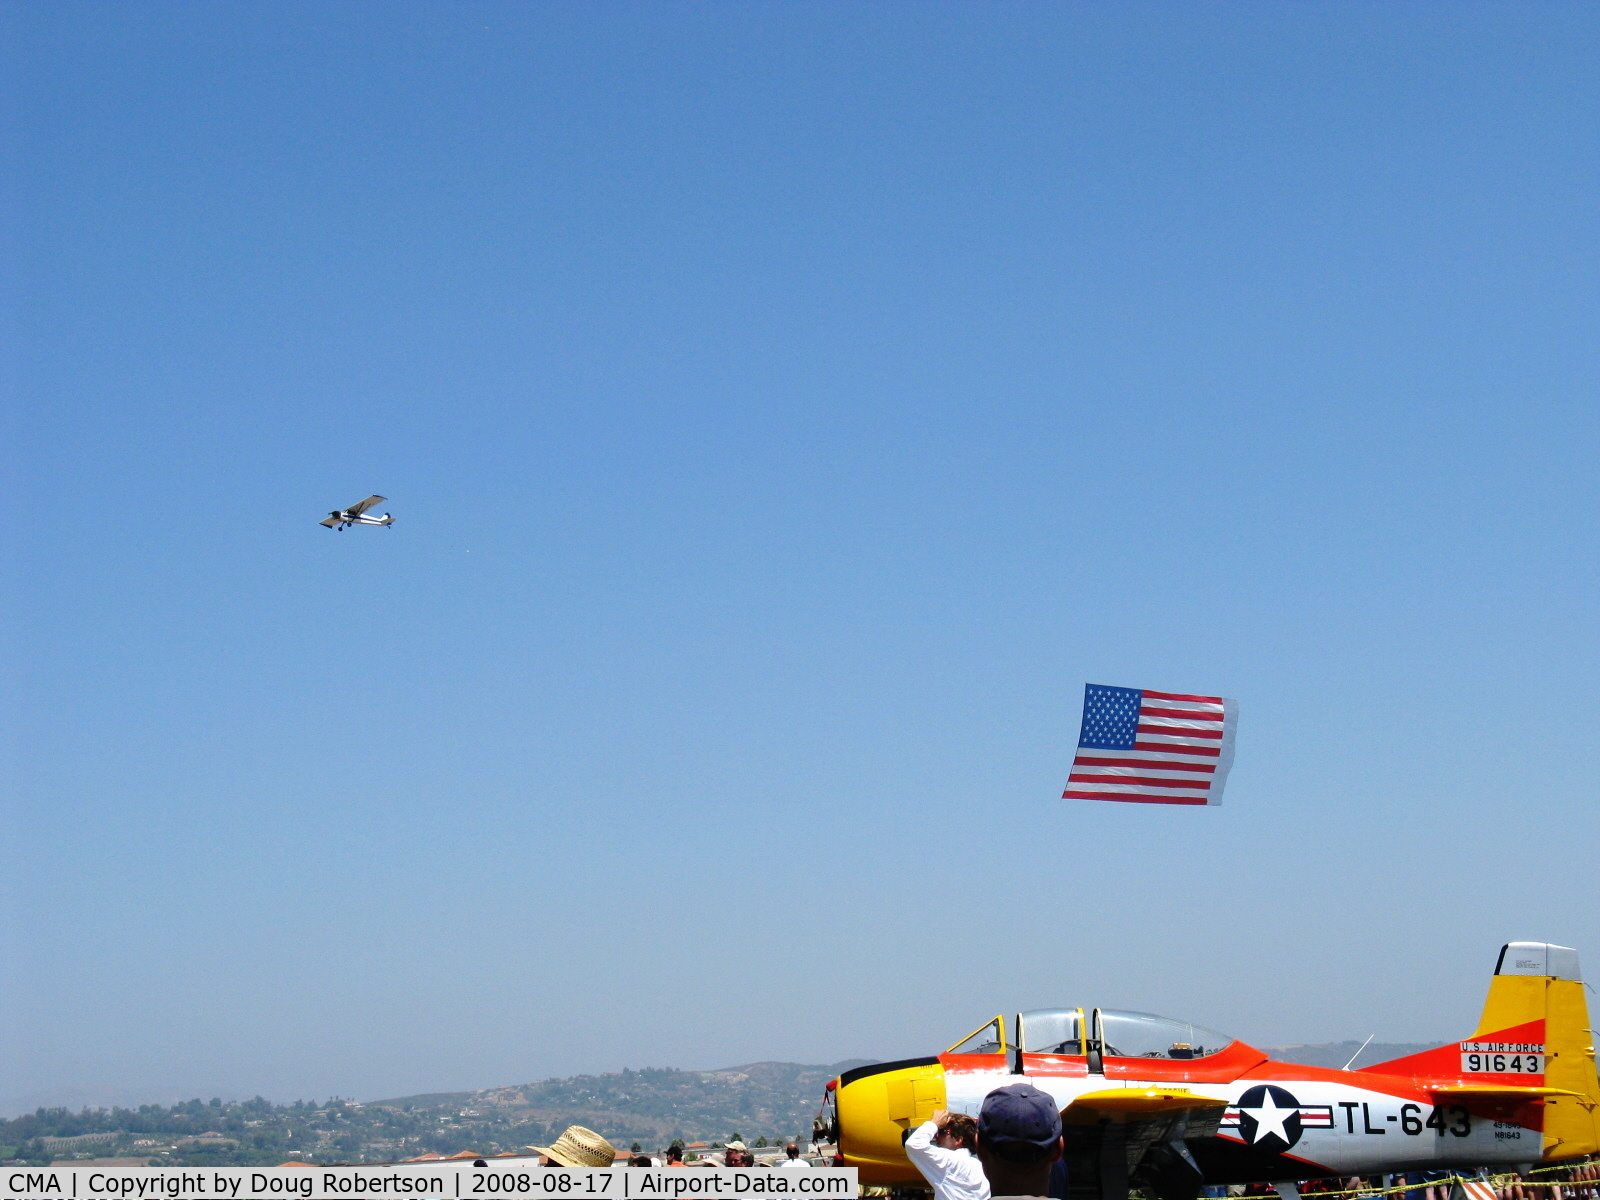 Camarillo Airport (CMA) - Opening the Annual Camarillo EAA Airshow with banner tow Old Glory